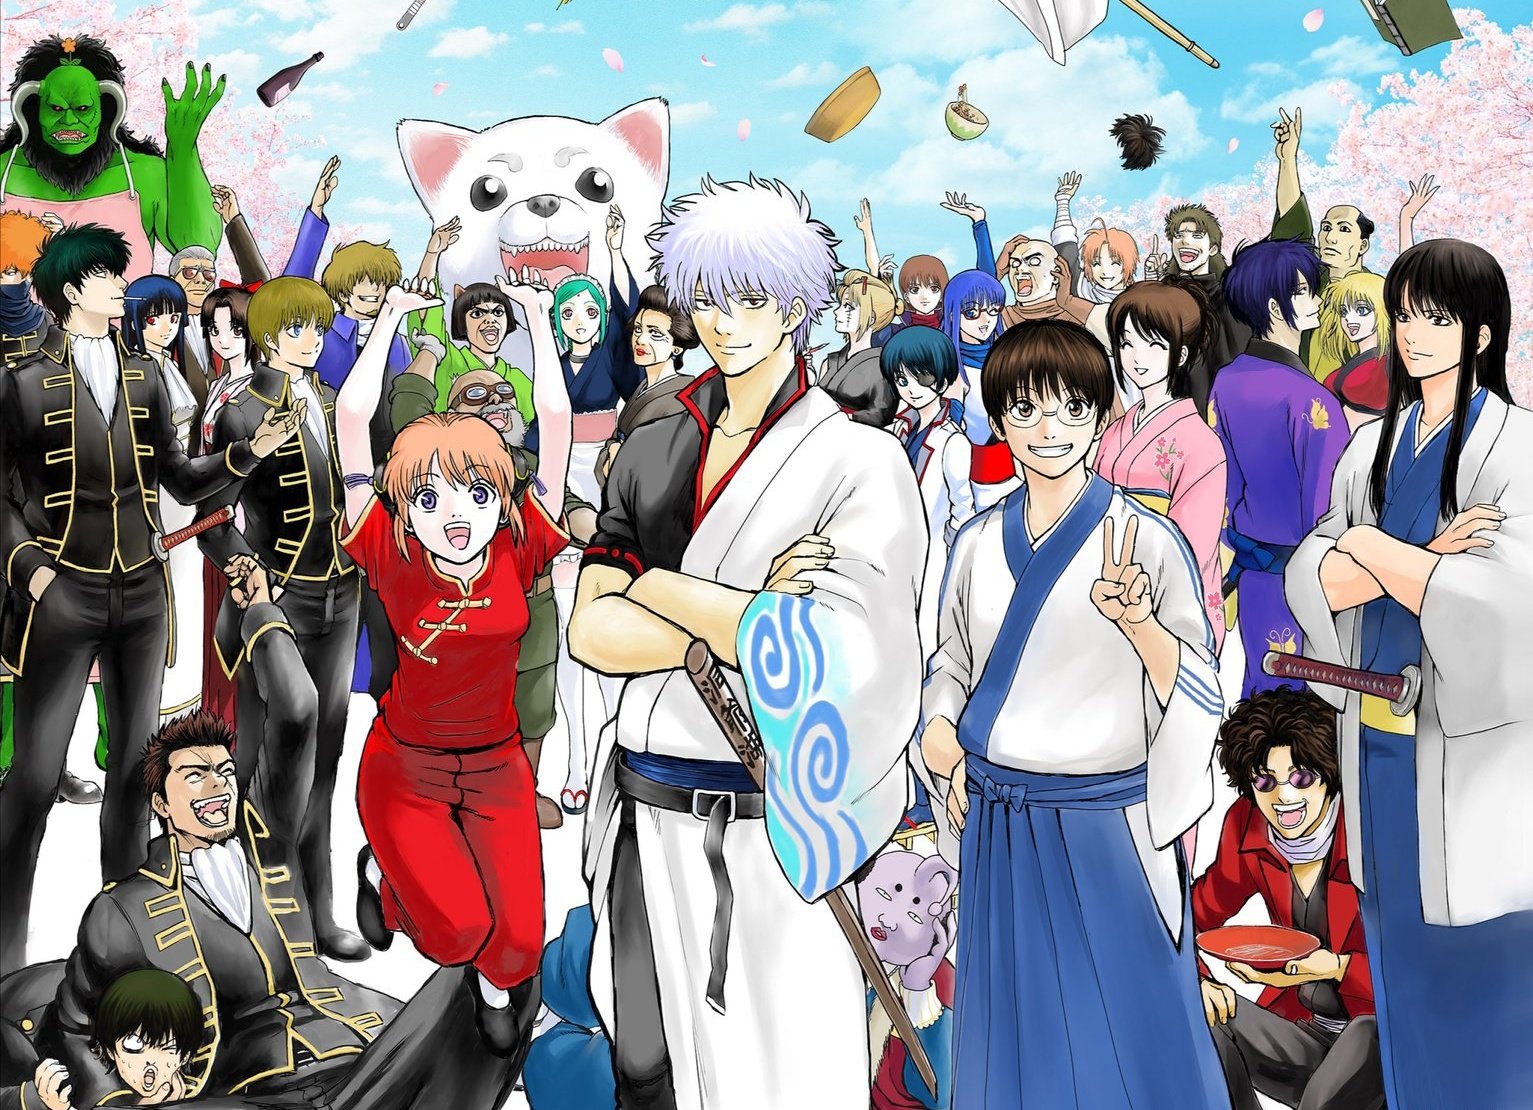 Jec Started Gintama Just For A Good Laugh In Life And Already Fell In Love With It Right From The Start Because Of How Charming The Characters Are I Adore